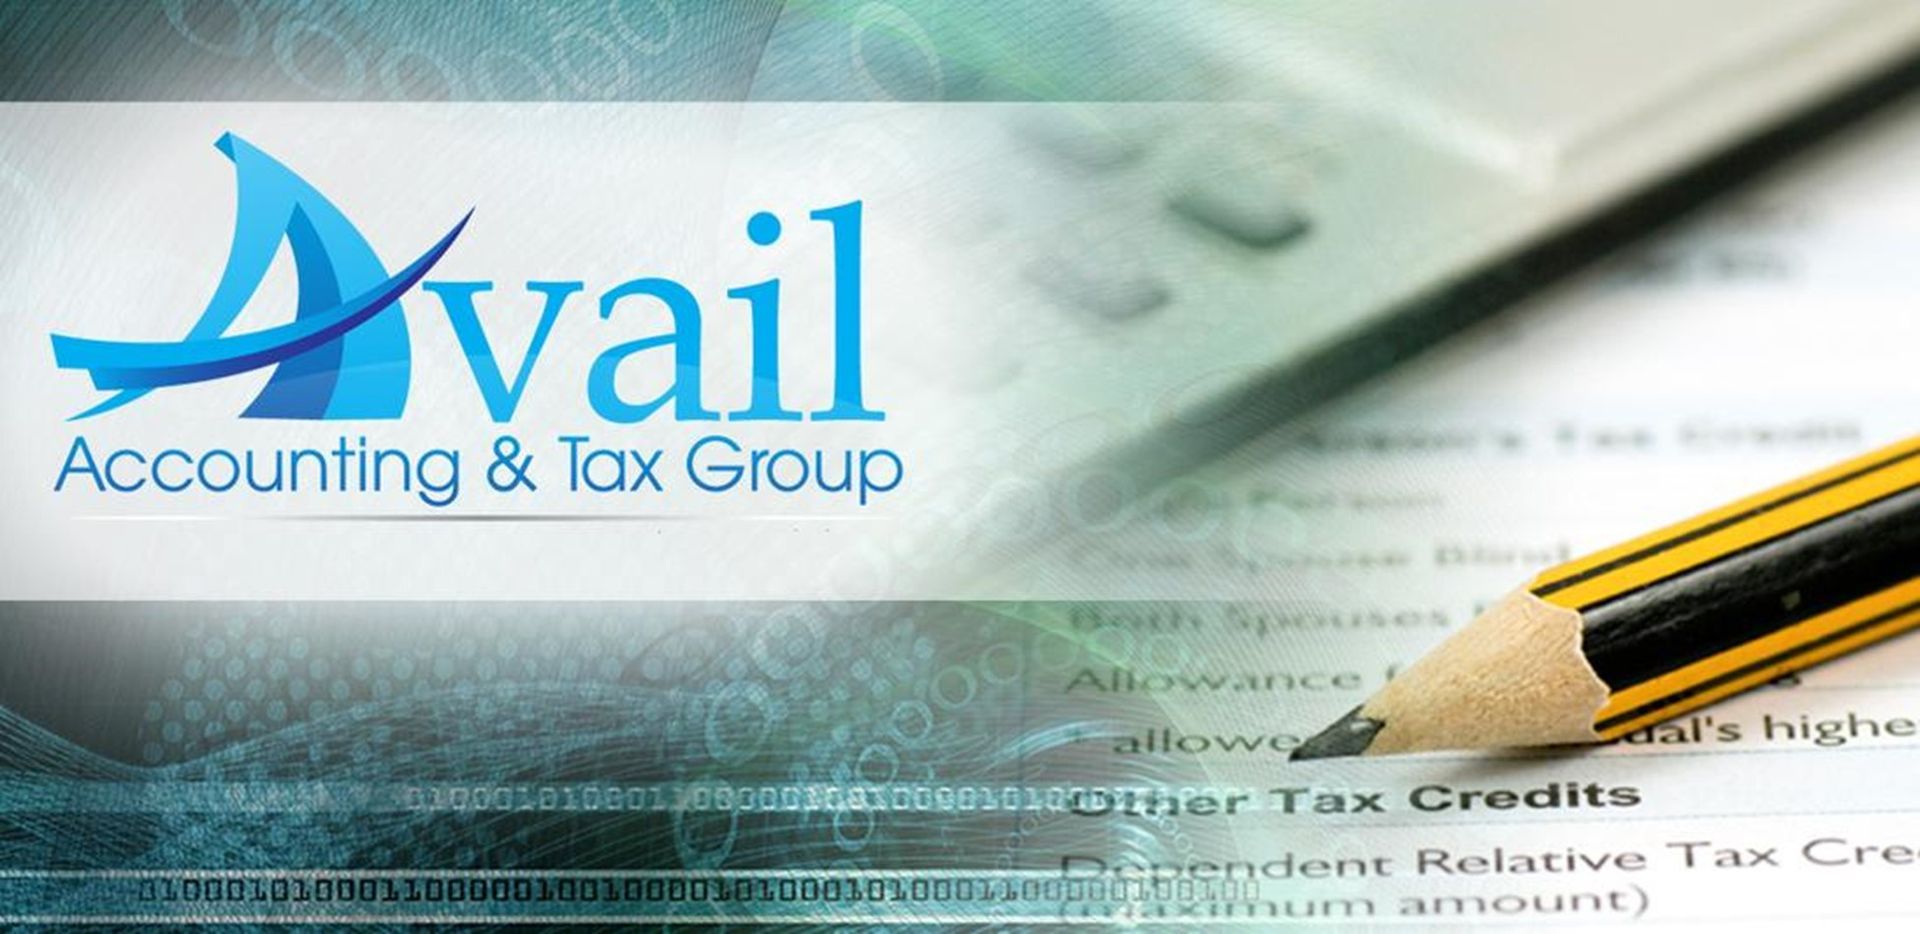 Avail Accounting & Tax Group